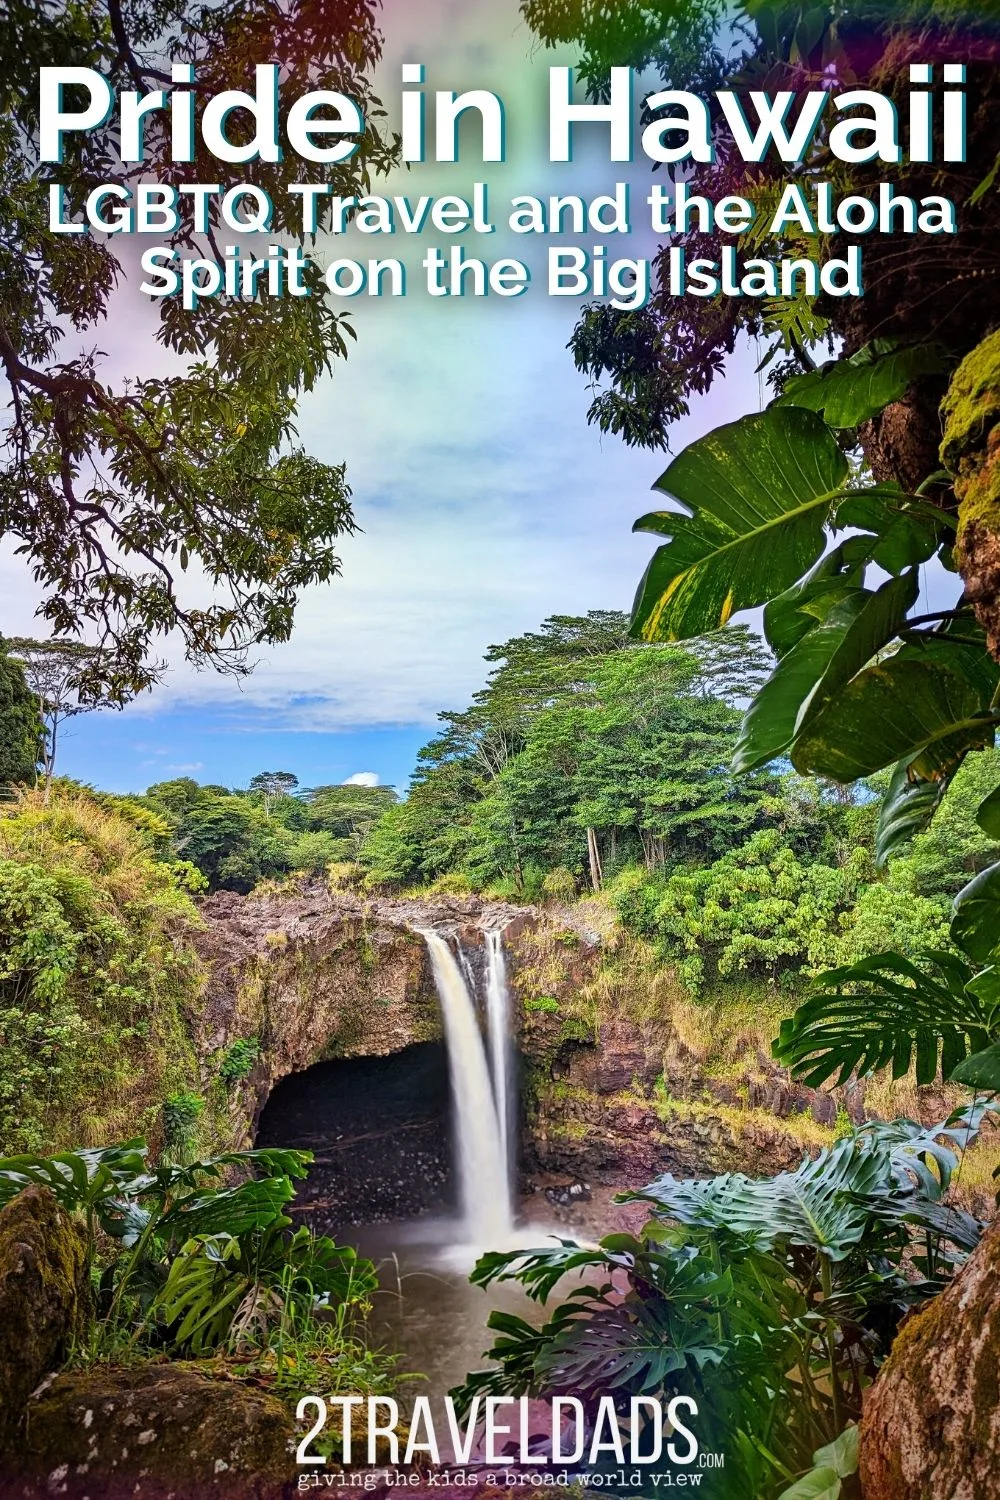 Thinking of visiting the Big Island of Hawaii without kids? We've got travel tips, itinerary ideas and Kona Pride information for planning a kid-free Hawaii trip.